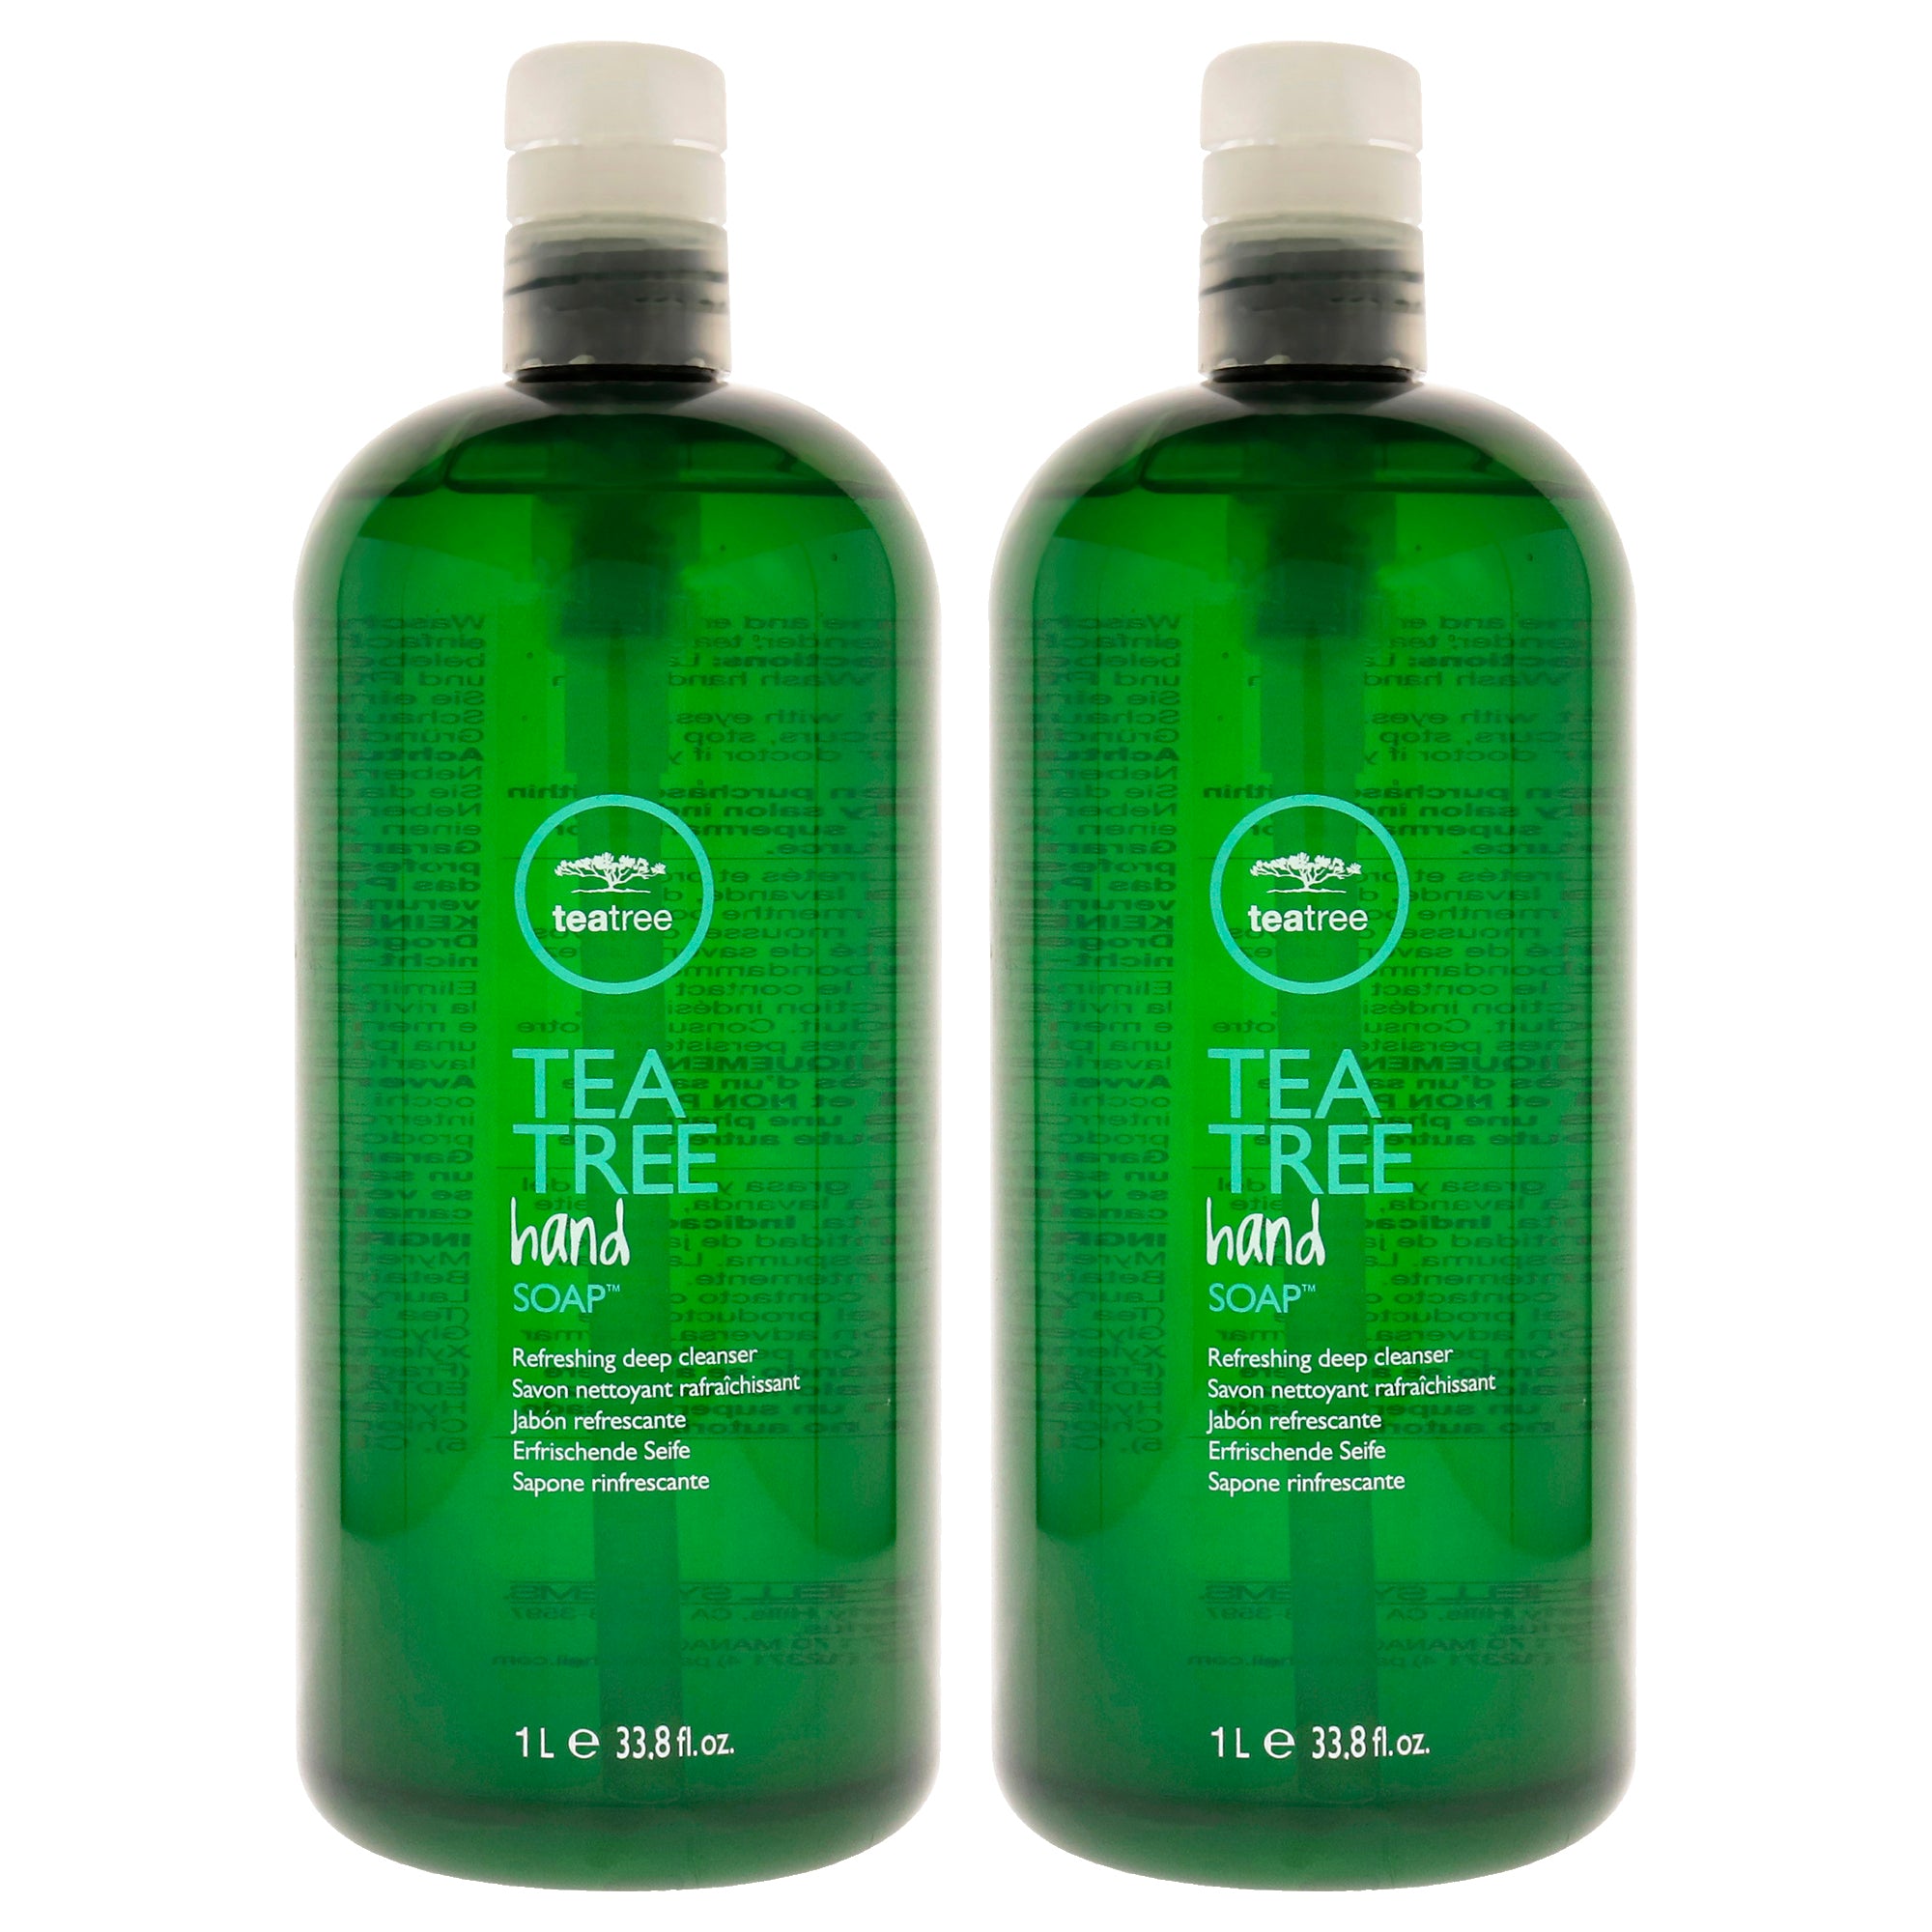 Tea Tree Hand Soap by Paul Mitchell for Unisex - 33.8 oz Soap - Pack of 2